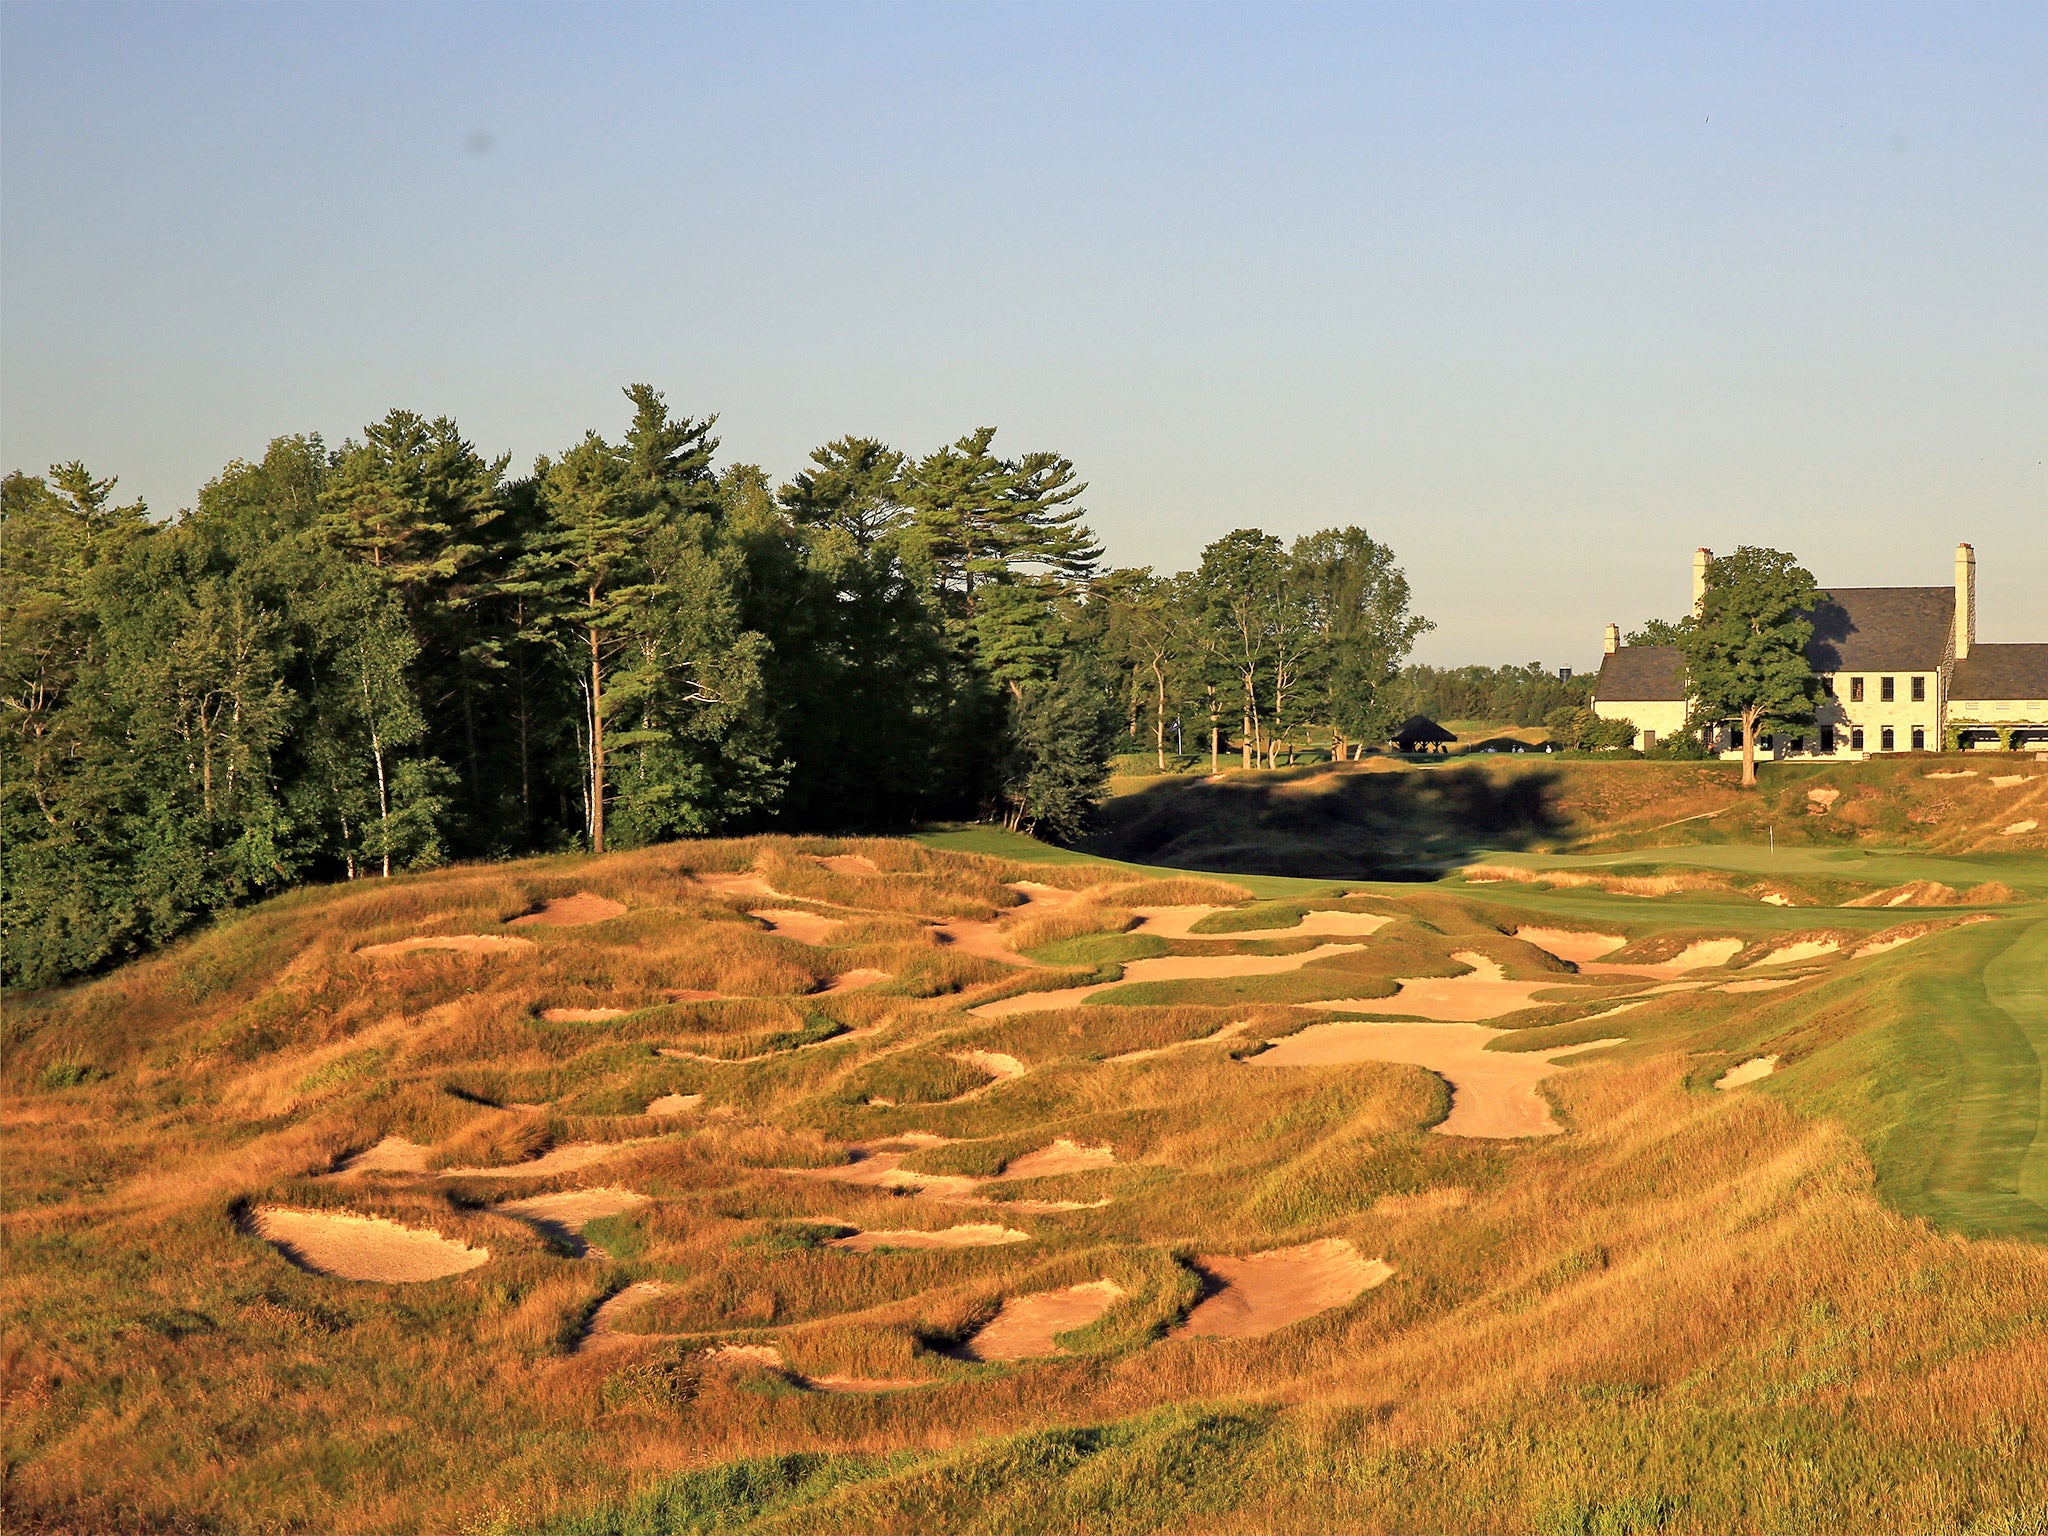 Whistling Straits’ 18th hole, where Dustin Johnson came to grief, features a maze of bunkers